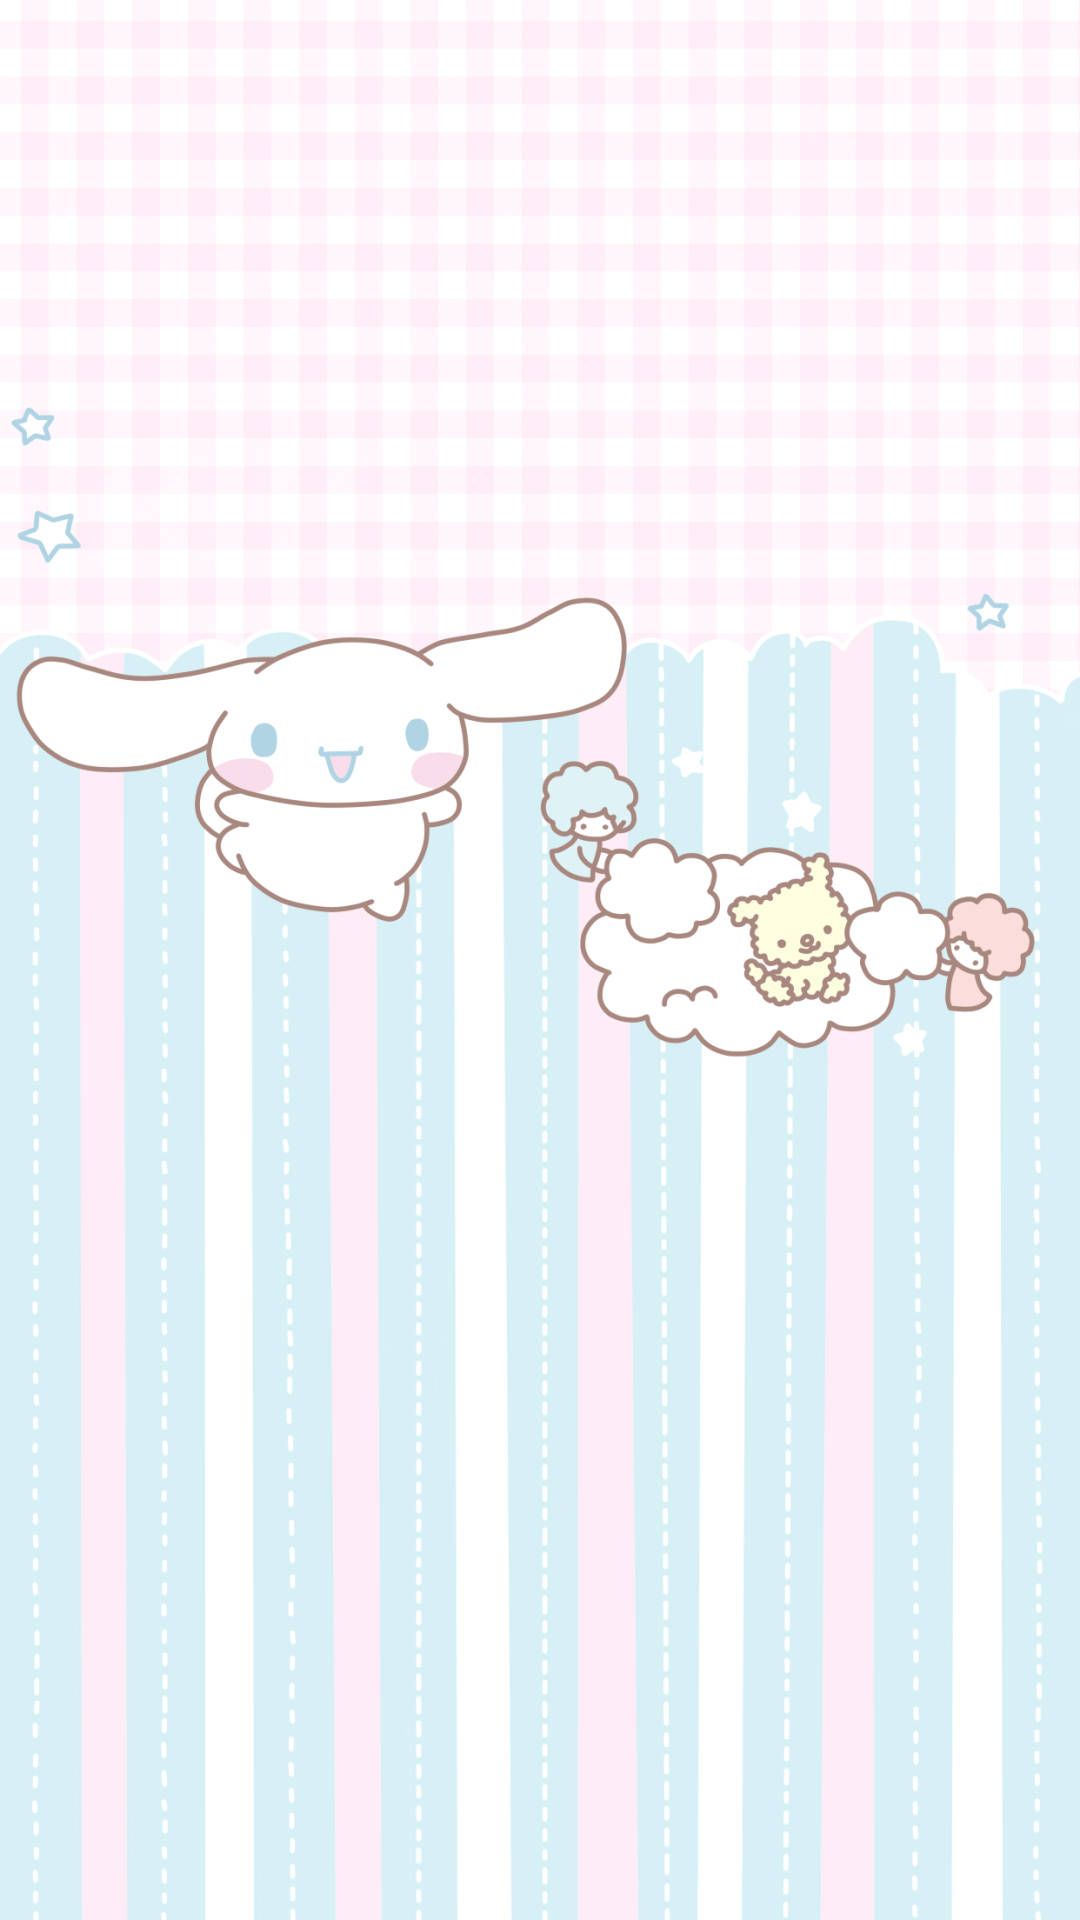 Cute Sanrio Characters iPhone Wallpaper with high-resolution 1080x1920 pixel. You can use this wallpaper for your iPhone 5, 6, 7, 8, X, XS, XR backgrounds, Mobile Screensaver, or iPad Lock Screen - Cinnamoroll